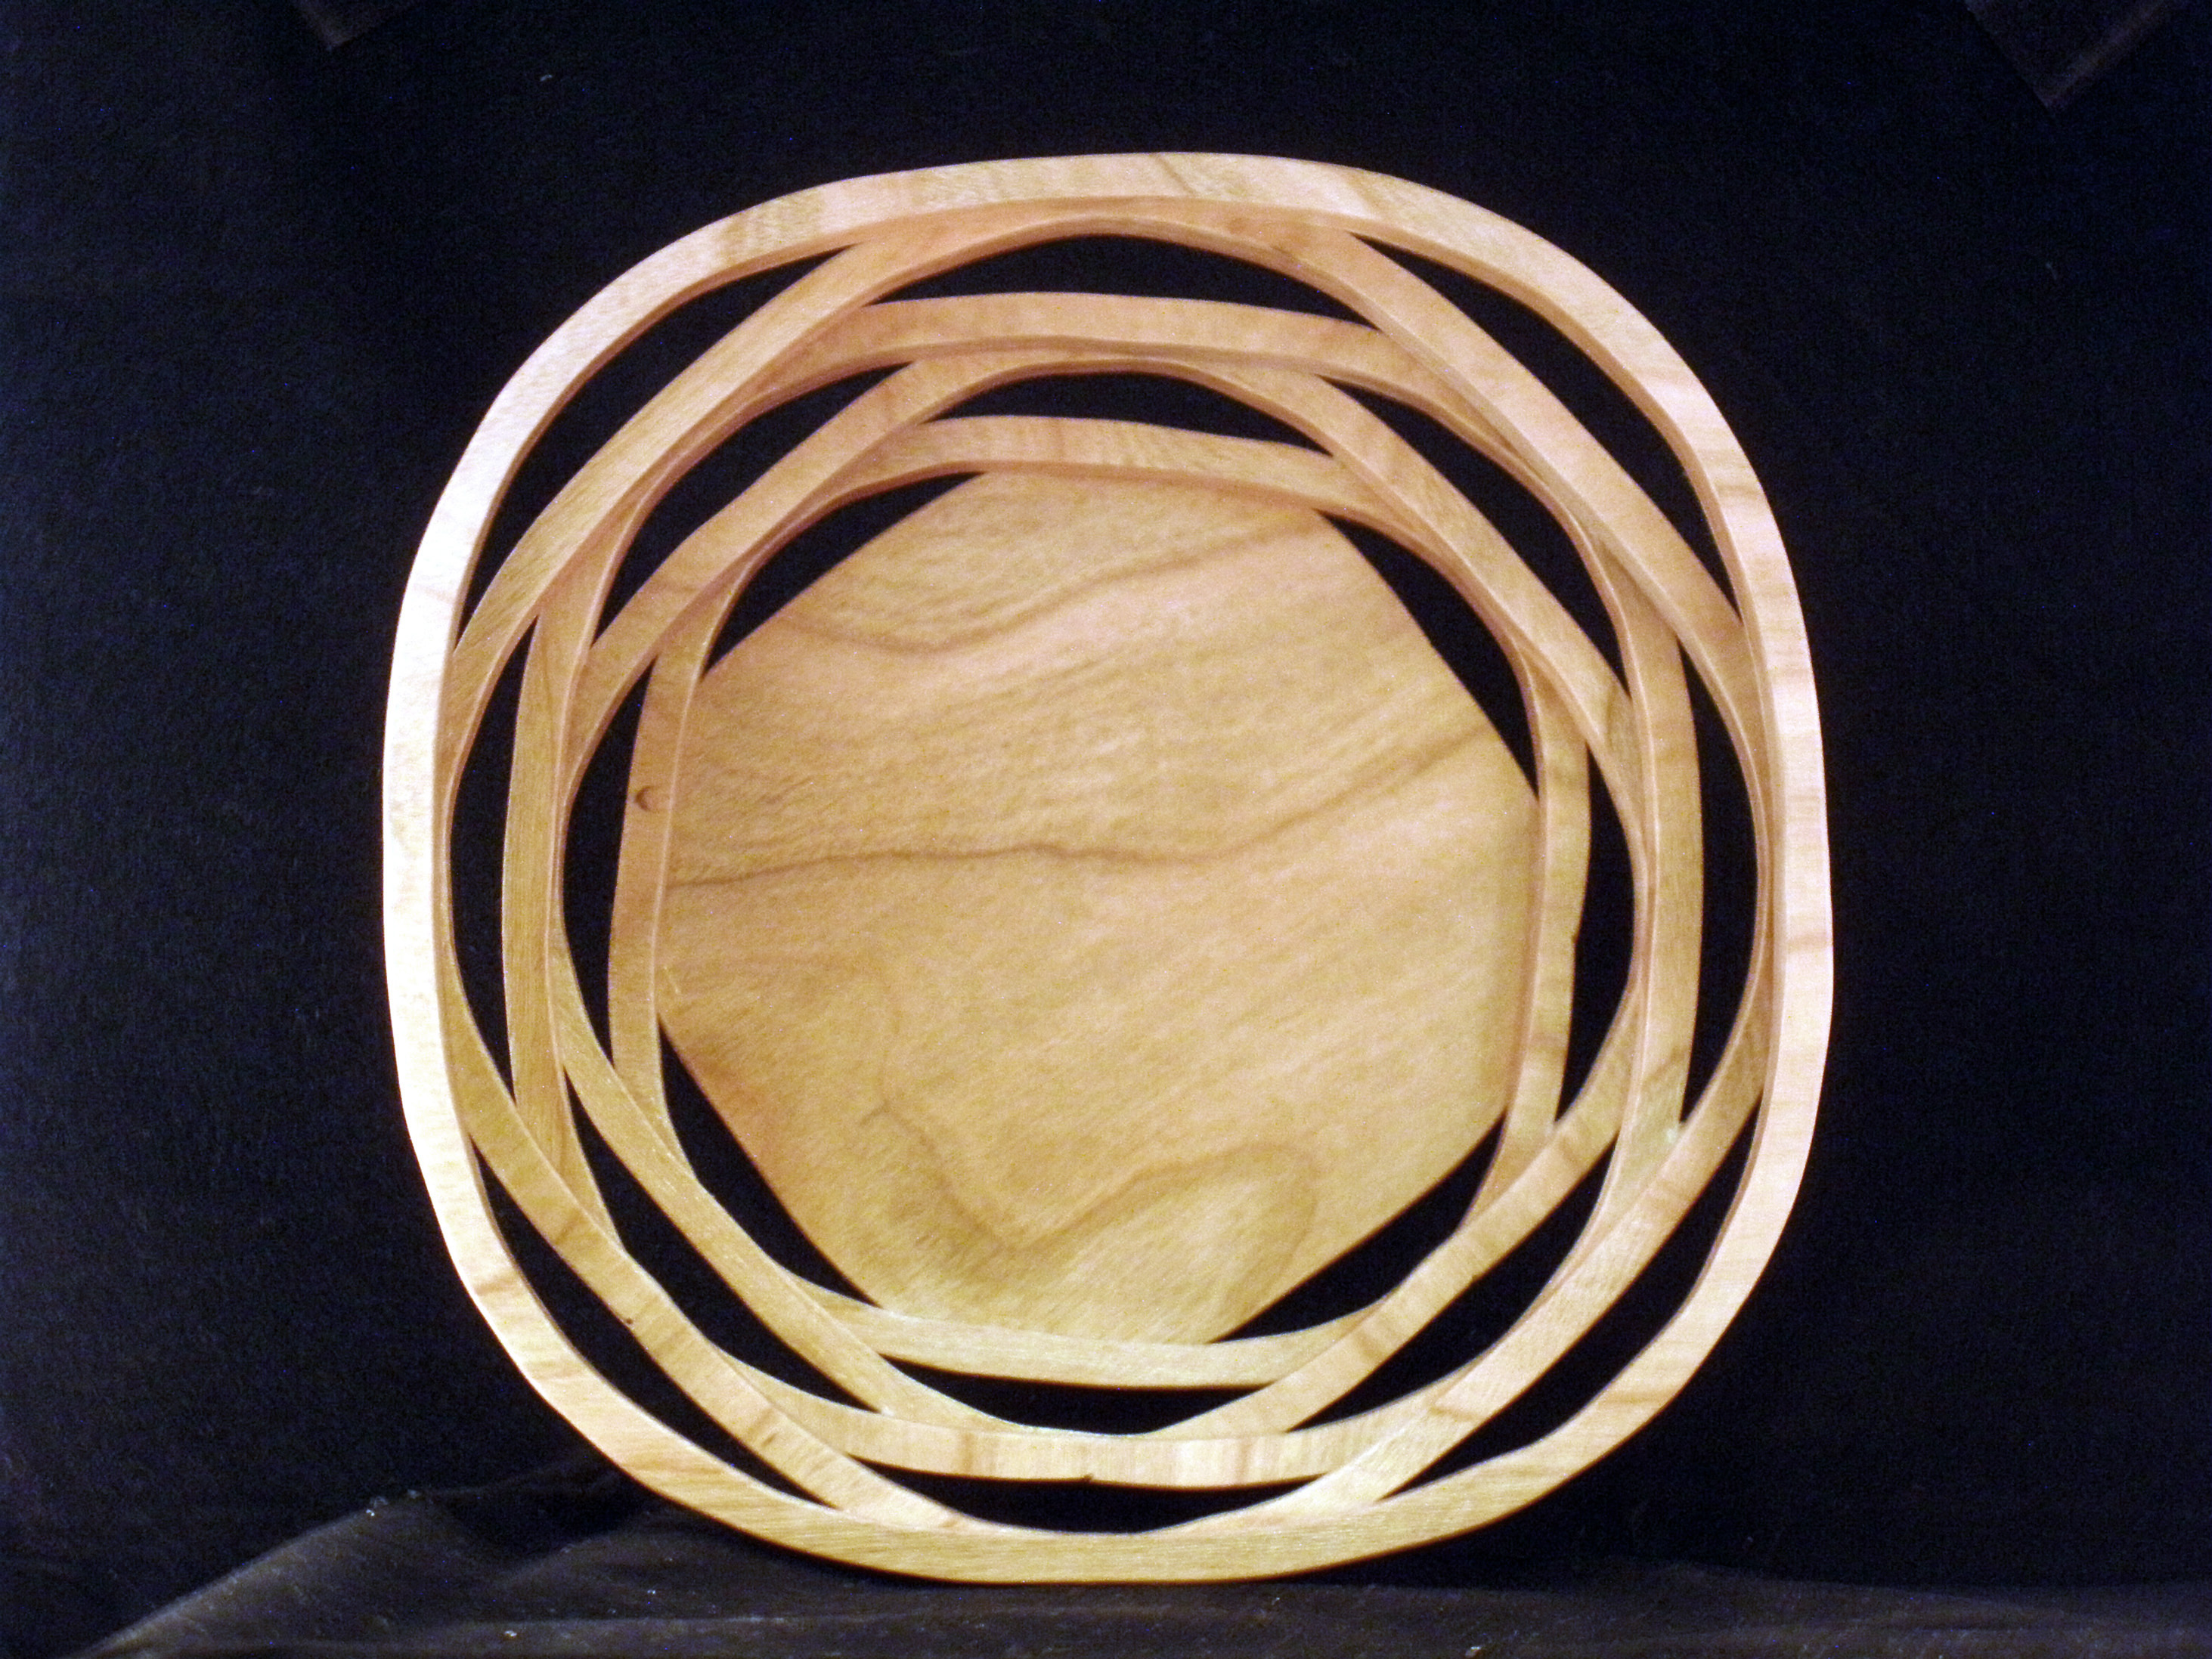 Asian-style basket in Cherry